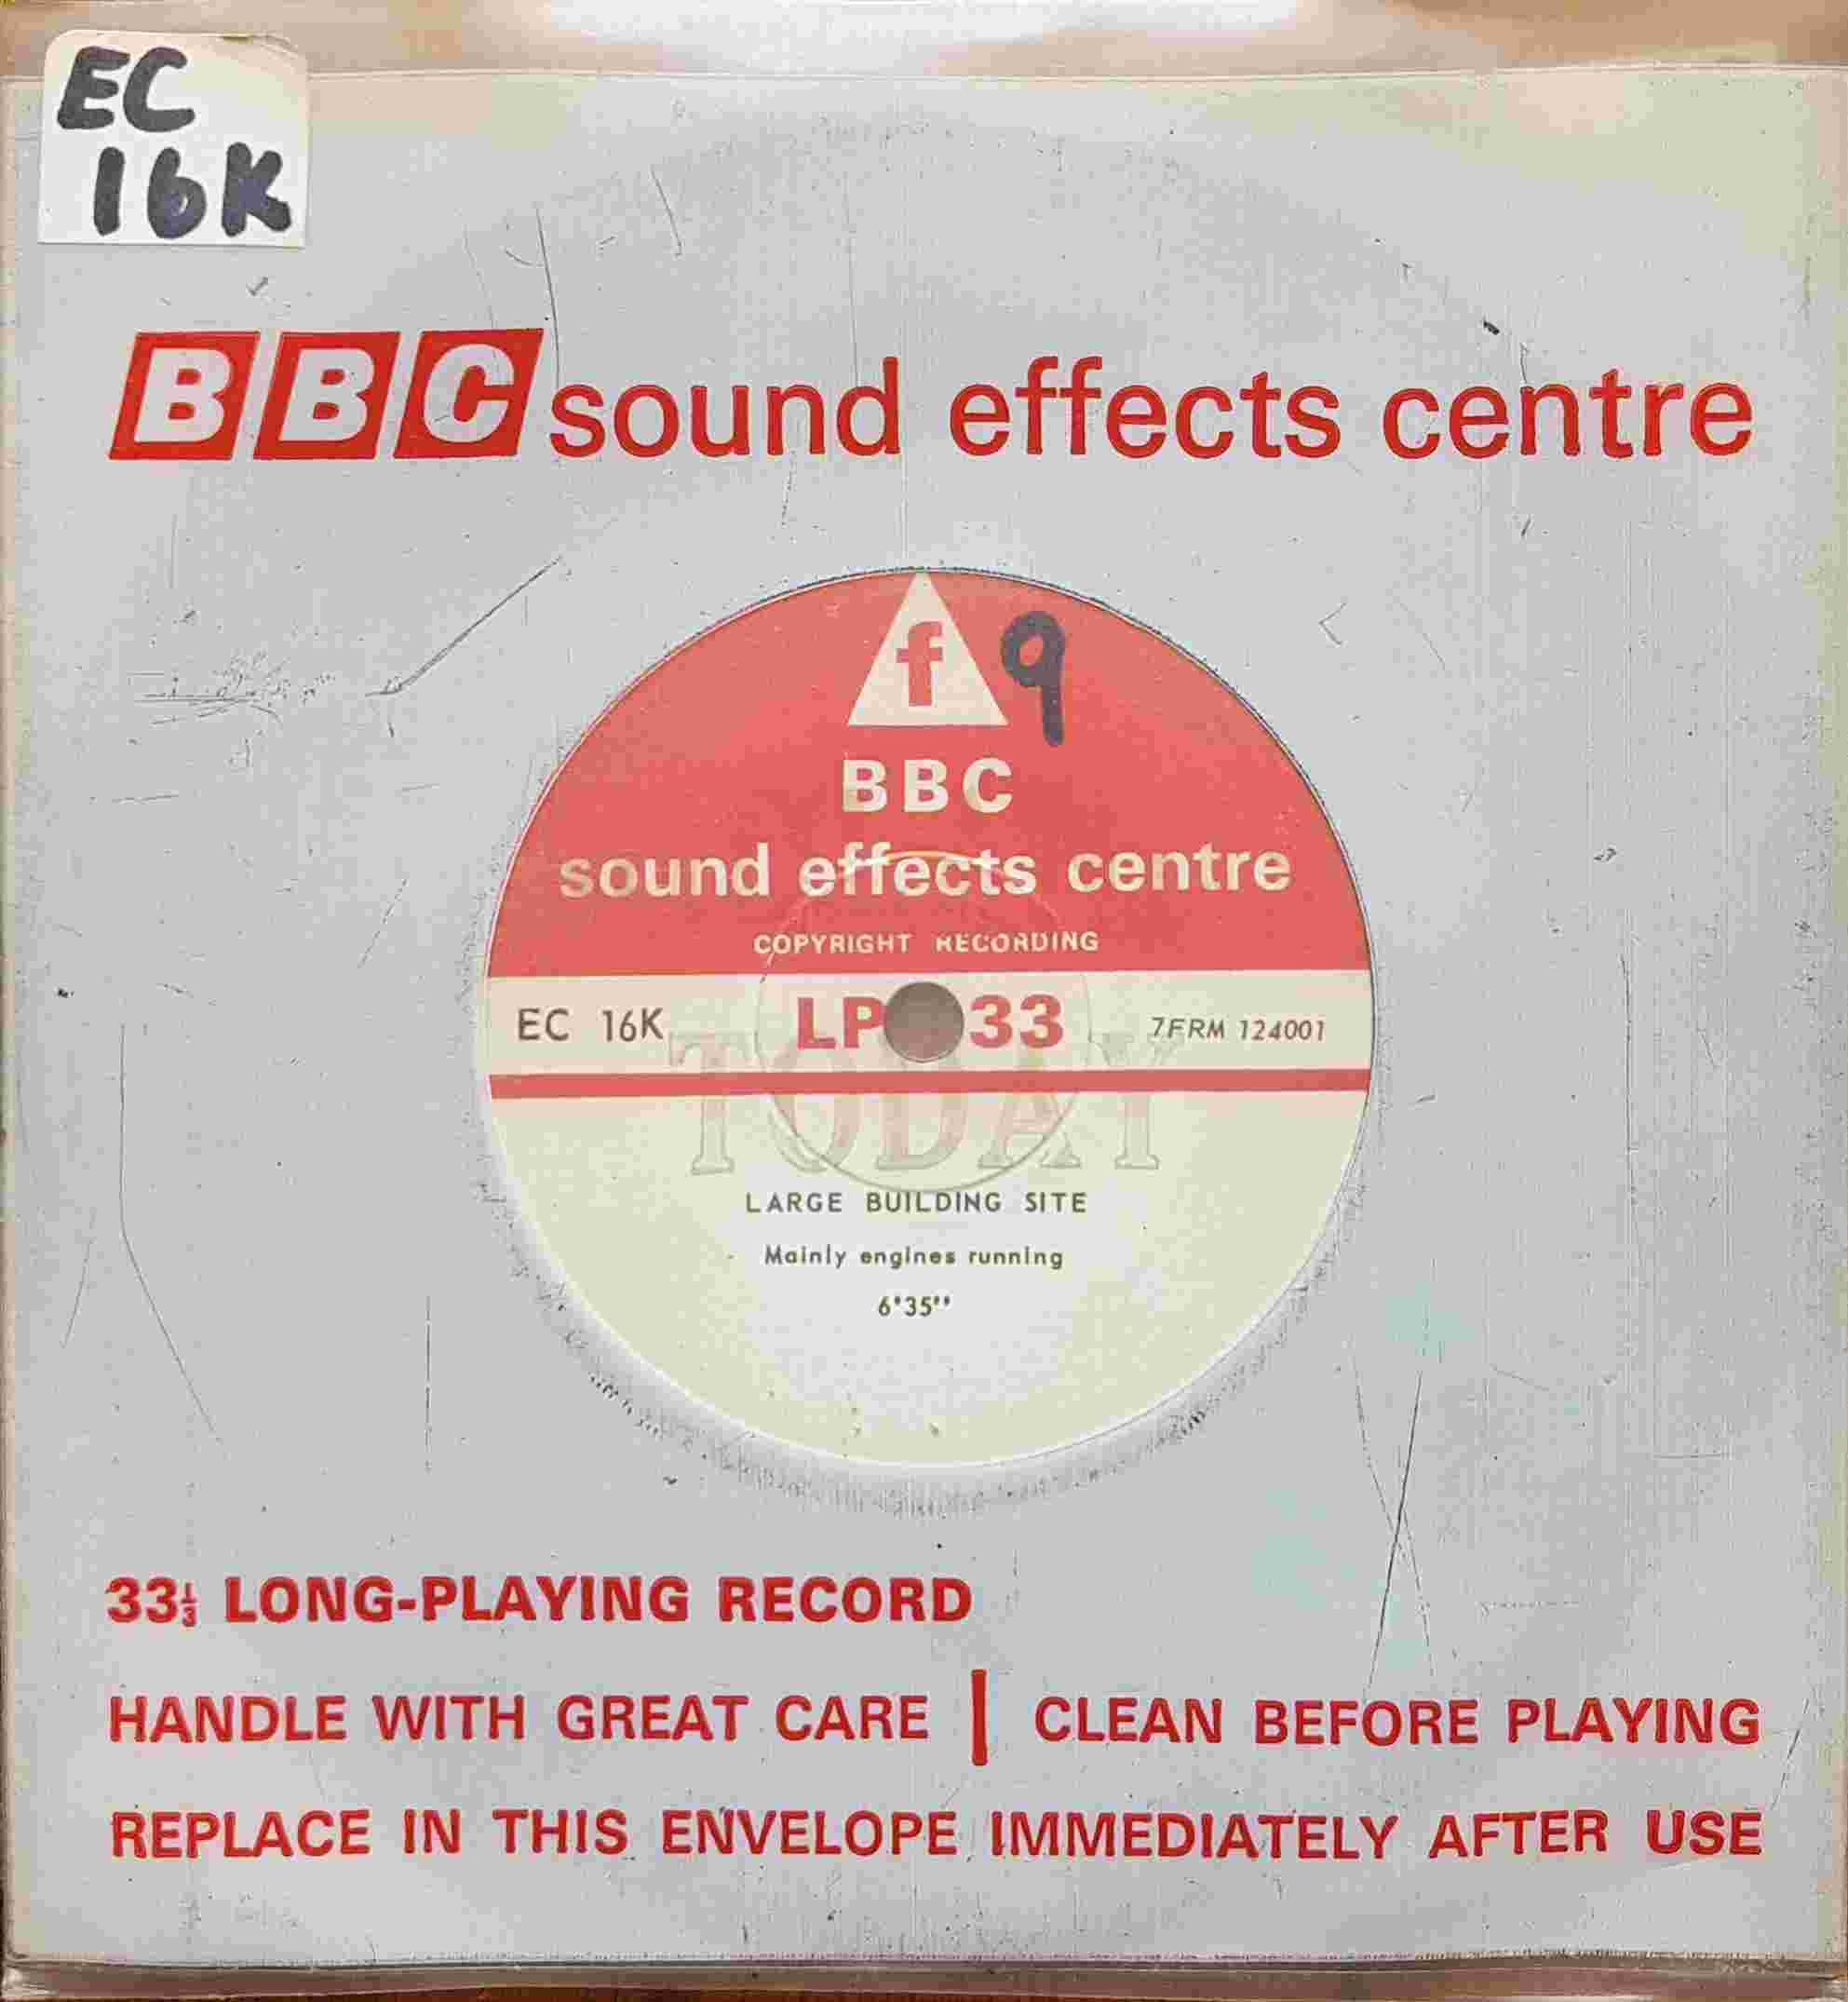 Picture of EC 16K Large building site / Building work by artist Not registered from the BBC singles - Records and Tapes library